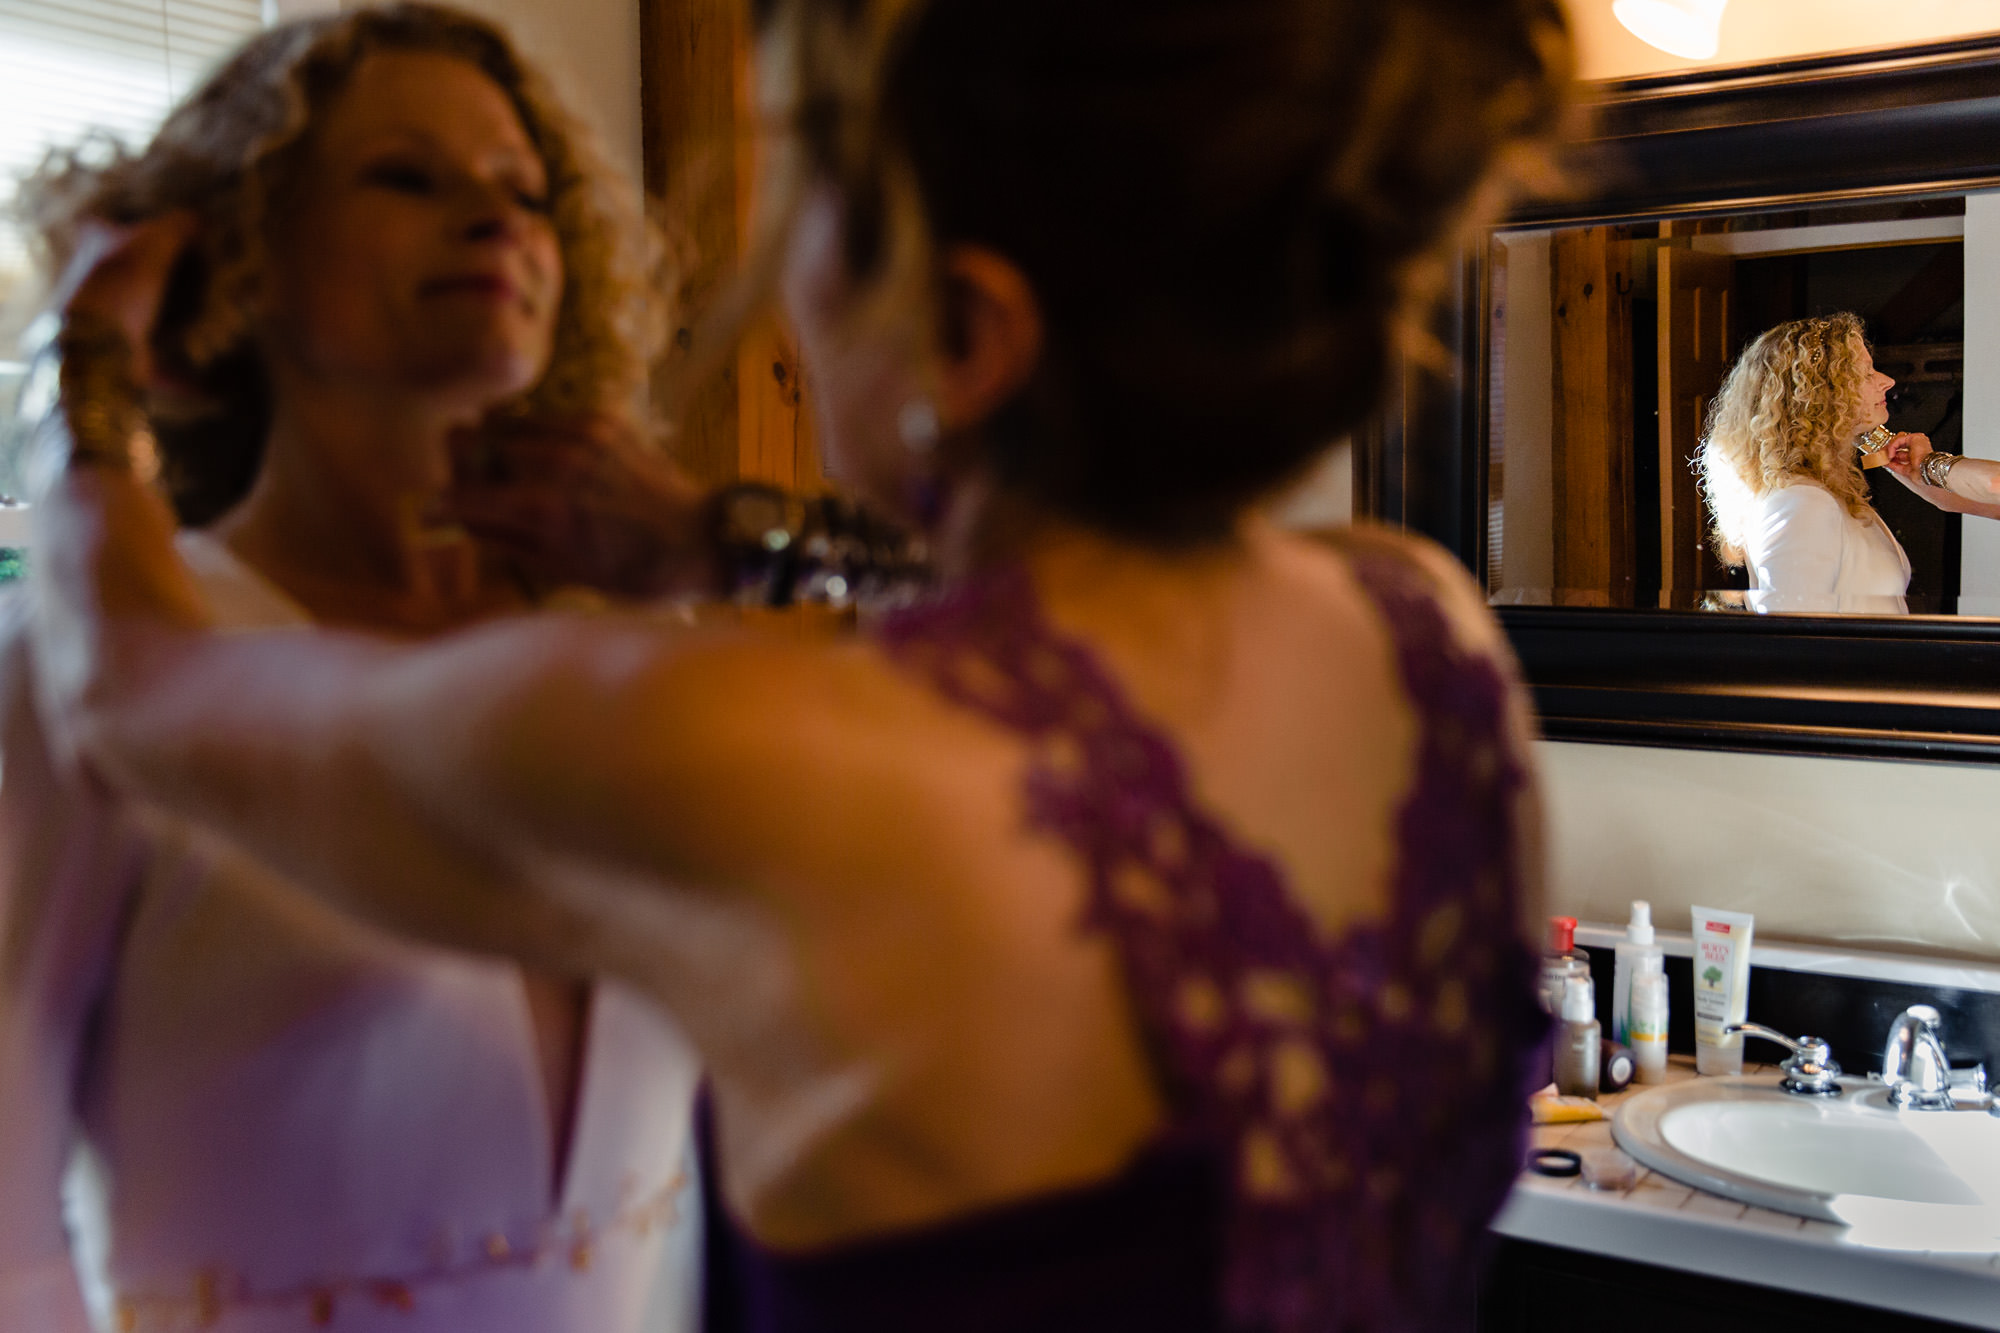 The bride retouches her makeup at her Poland Maine wedding ceremony